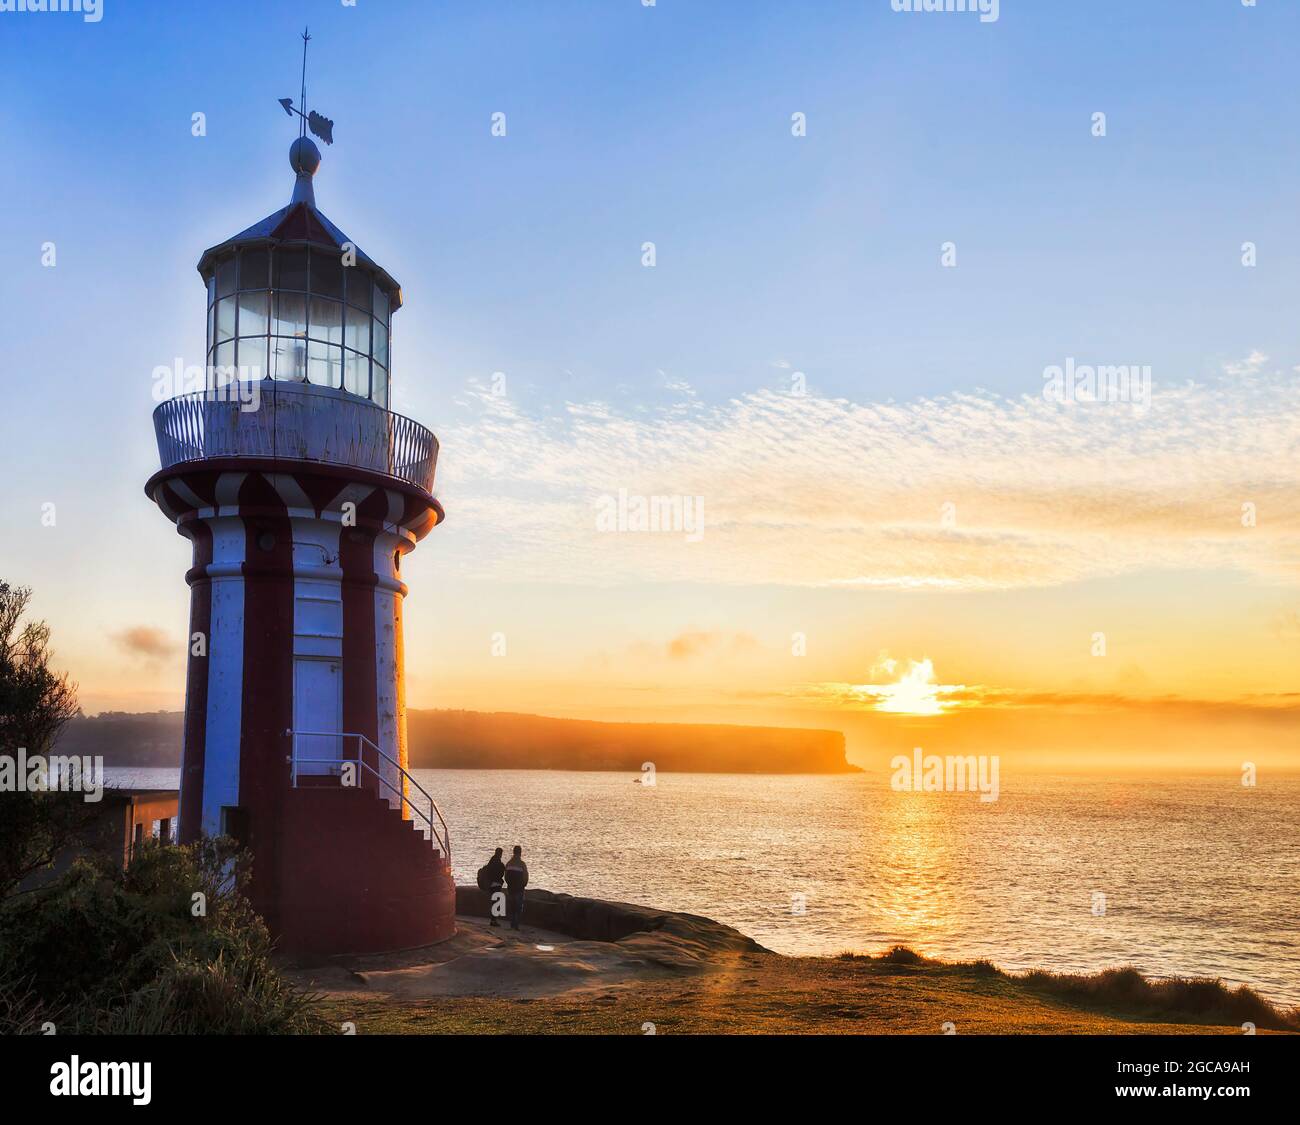 Striped red-white lighthouse at the entrance to Sydney Harbour on Pacific ocean coast - erected in 1858, scenic sunrise seascape . Stock Photo